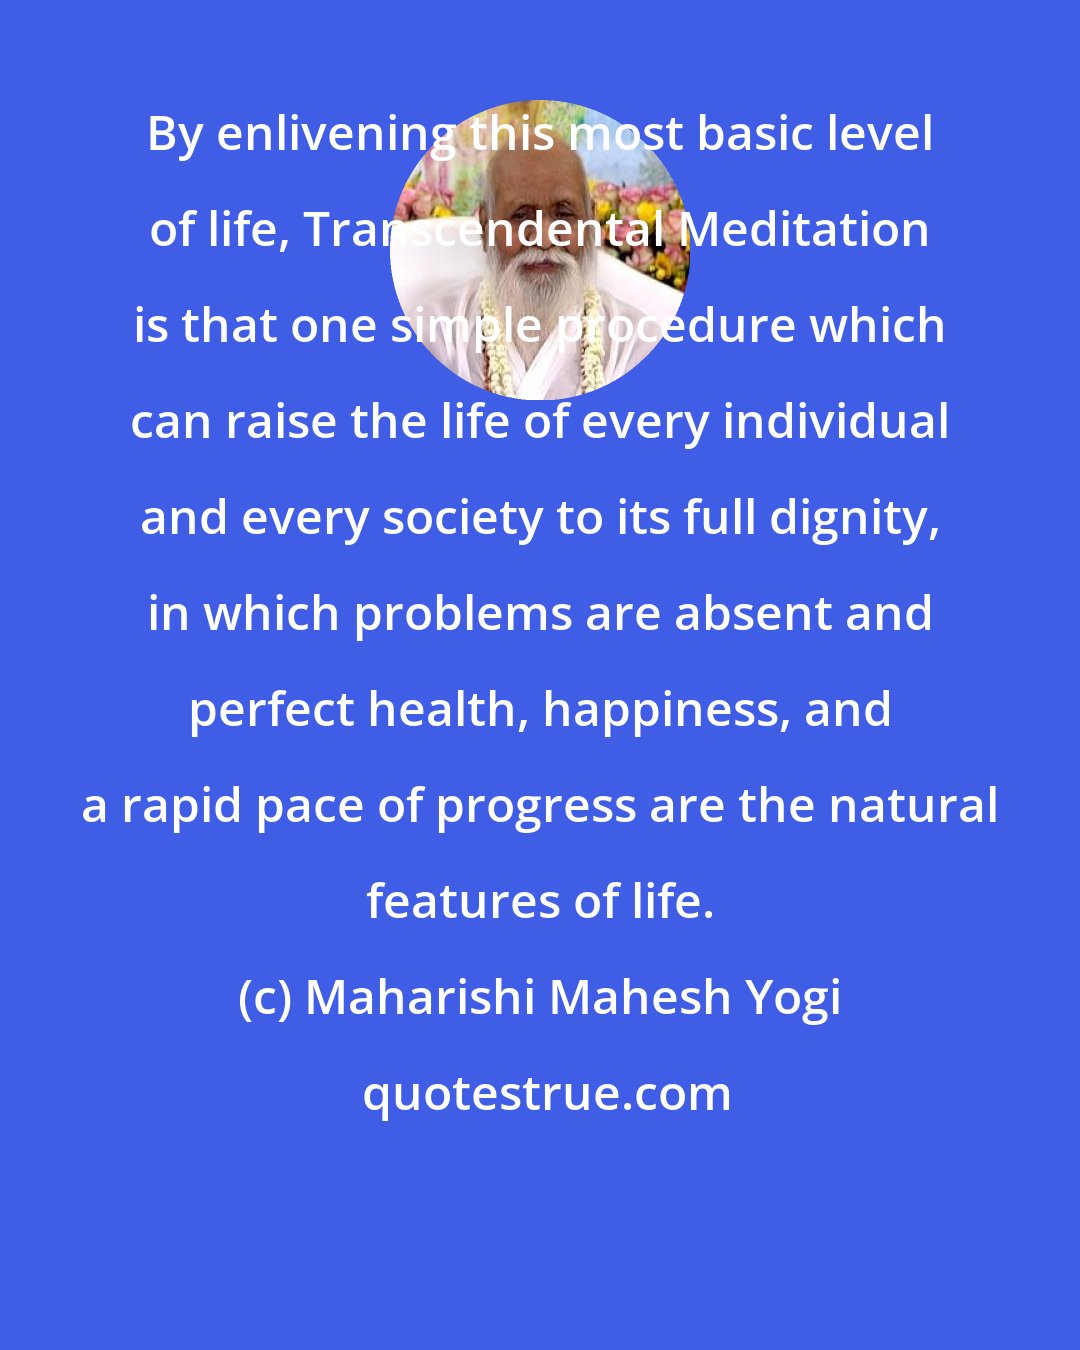 Maharishi Mahesh Yogi: By enlivening this most basic level of life, Transcendental Meditation is that one simple procedure which can raise the life of every individual and every society to its full dignity, in which problems are absent and perfect health, happiness, and a rapid pace of progress are the natural features of life.